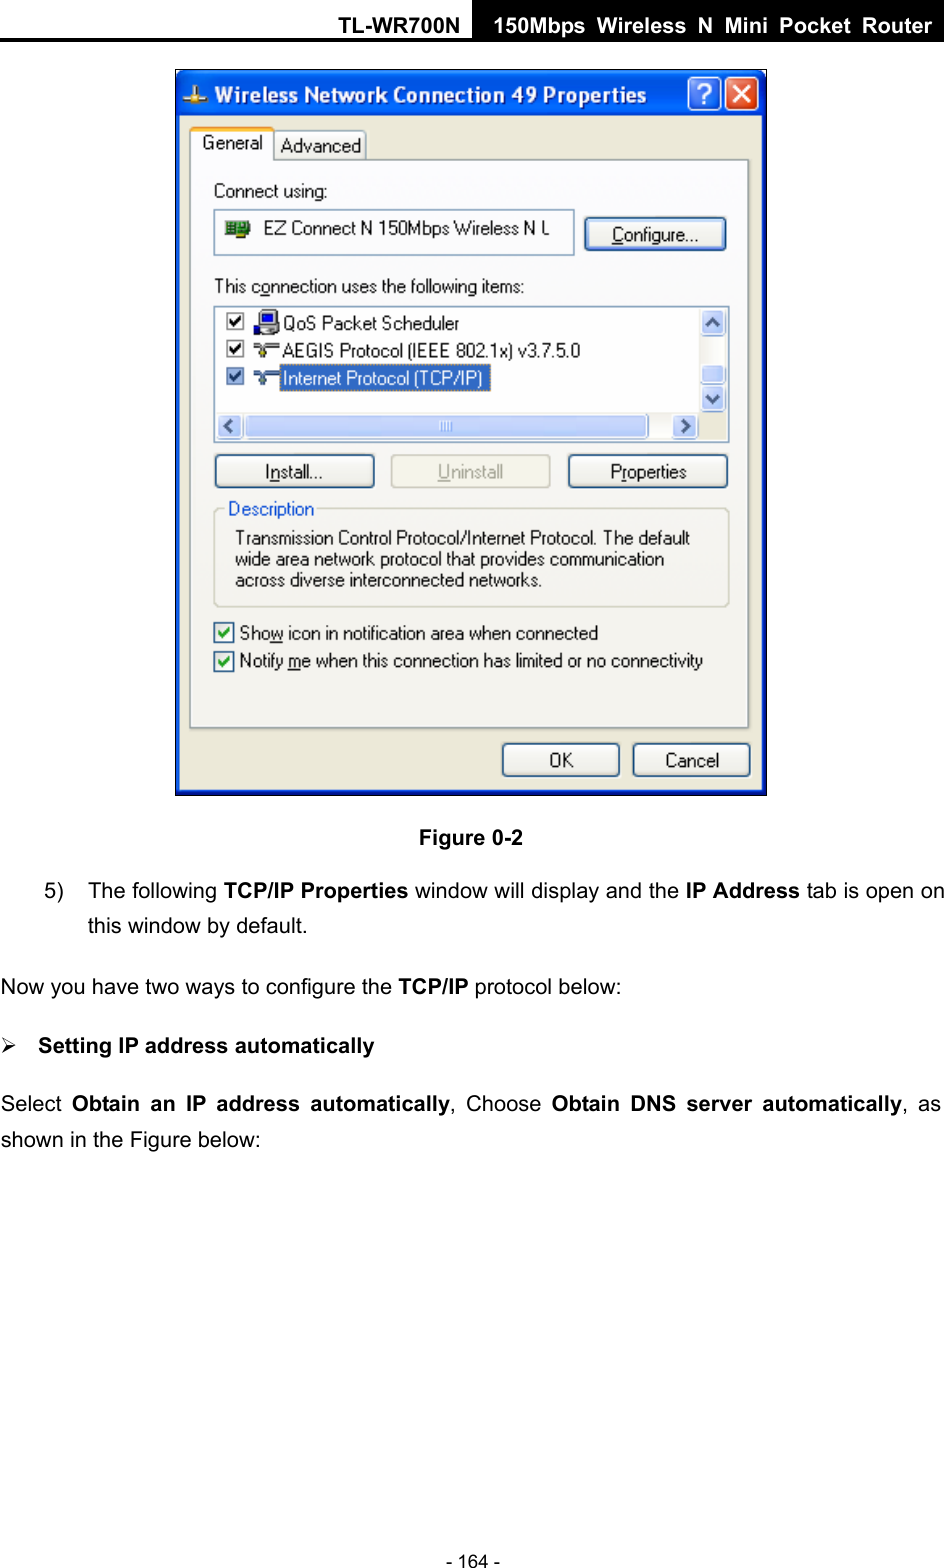 TL-WR700N 150Mbps Wireless N Mini Pocket Router - 164 -  Figure 0-2 5) The following TCP/IP Properties window will display and the IP Address tab is open on this window by default. Now you have two ways to configure the TCP/IP protocol below: ¾ Setting IP address automatically Select  Obtain an IP address automatically, Choose Obtain DNS server automatically, as shown in the Figure below: 